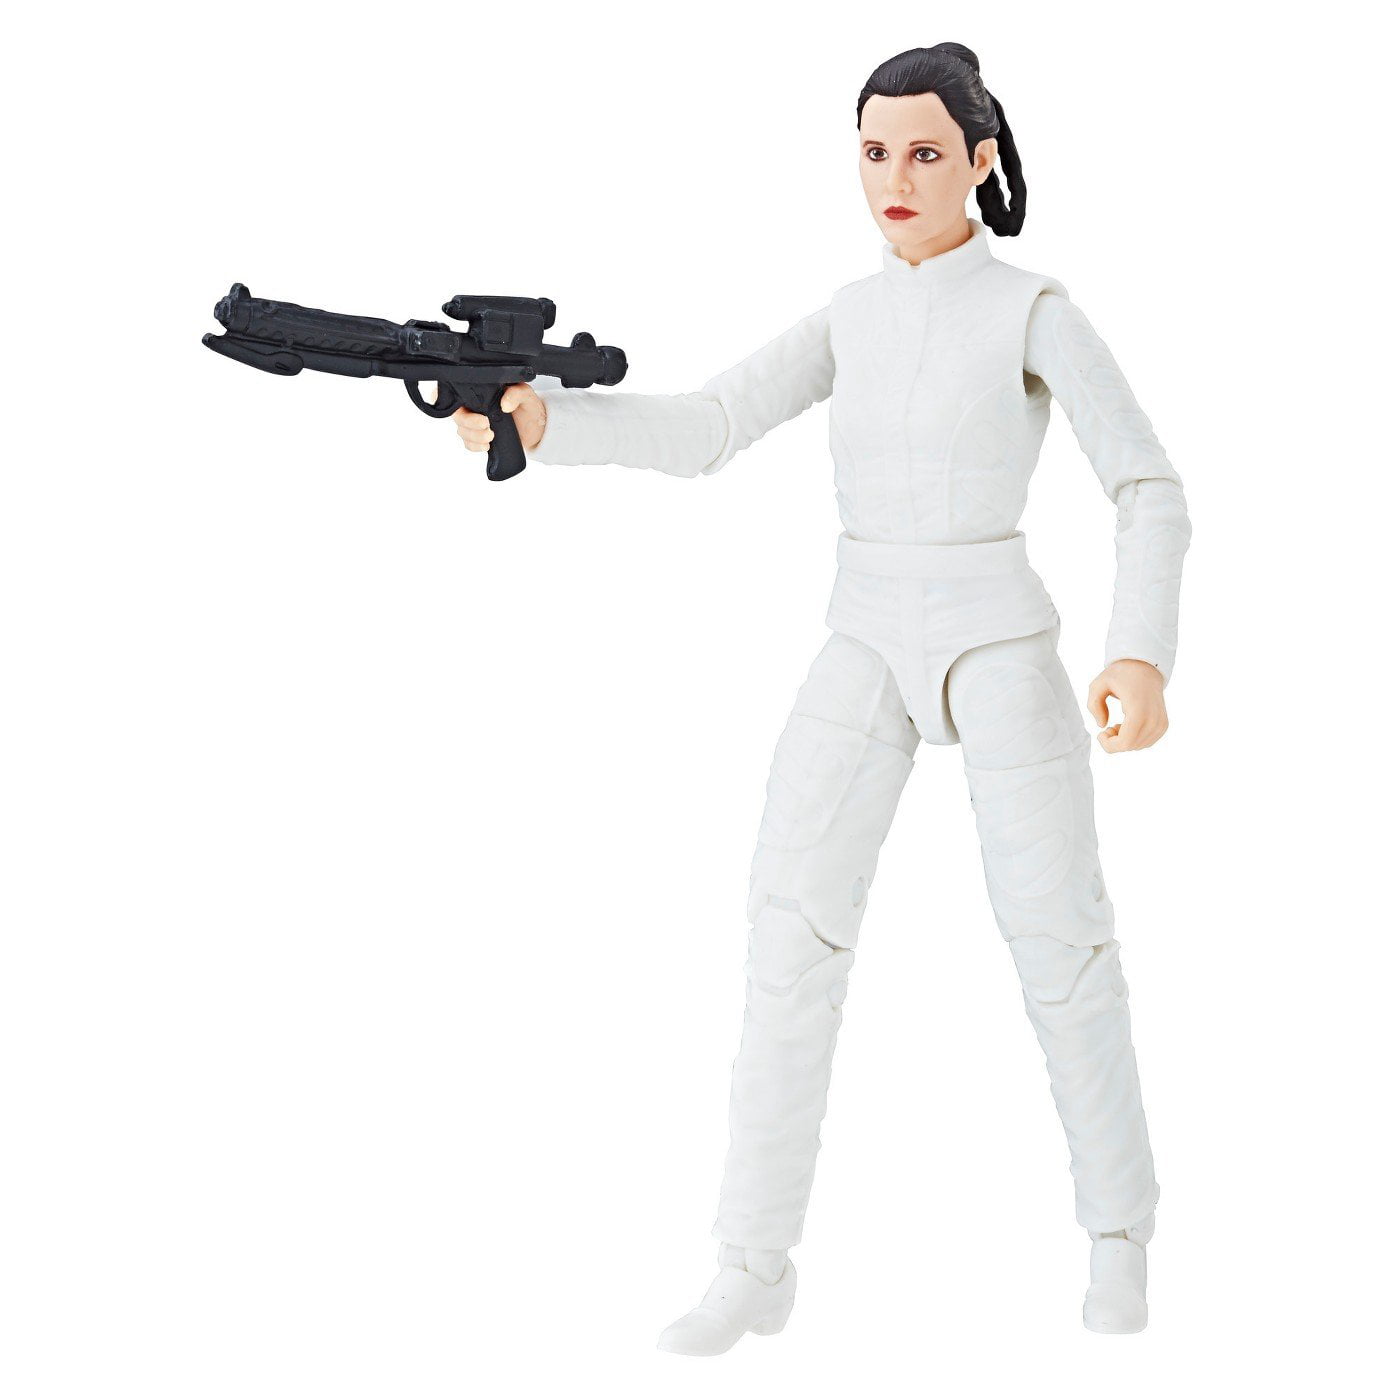 Star Wars Princess Leia Bespin Escape Black Series 6 inch Action Figure